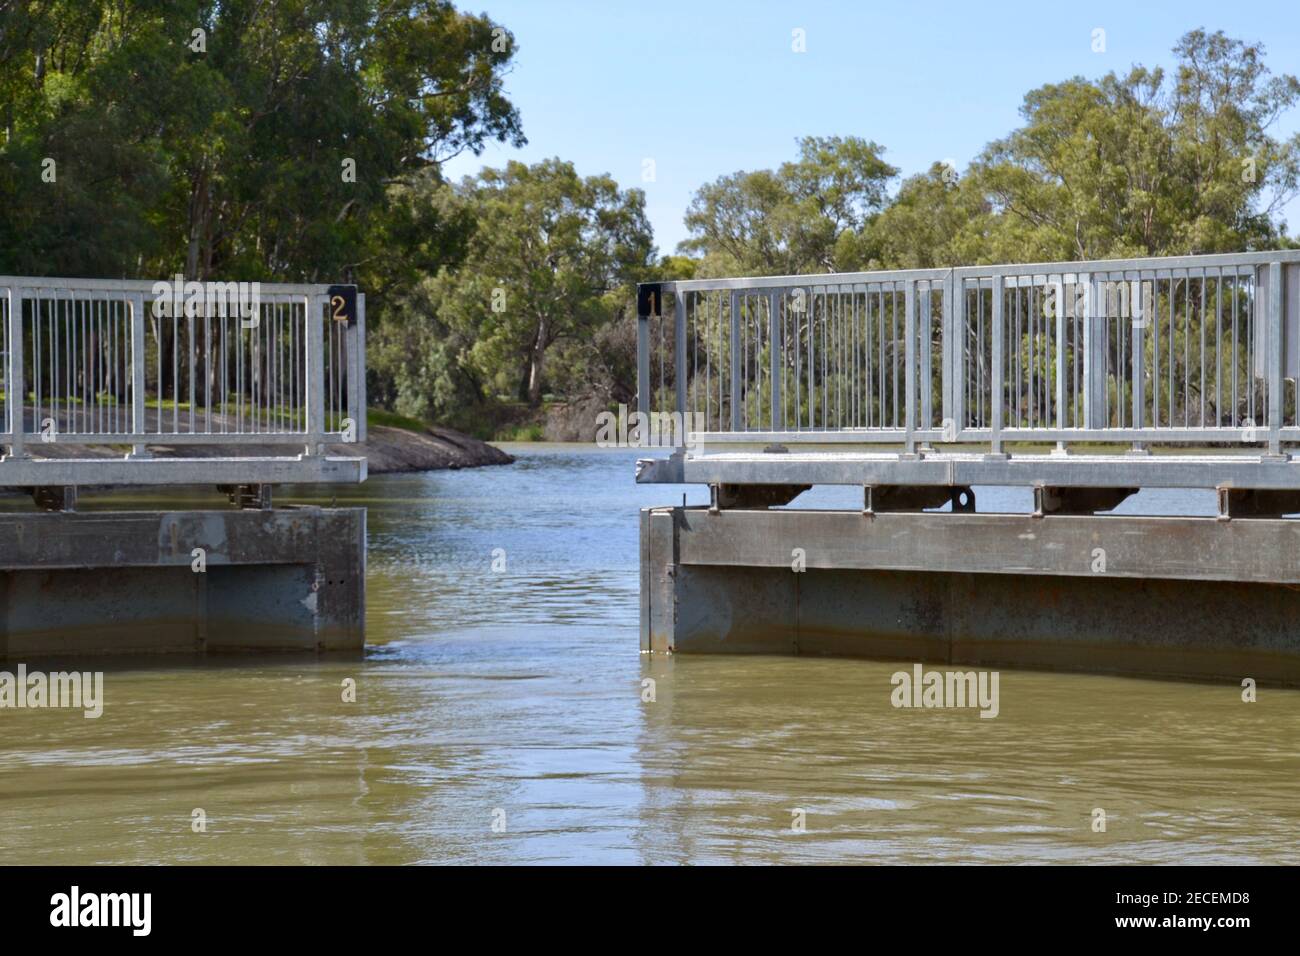 Hydraulic mechanical gates at Lock 11 on the Murray River near Mildura opening to allow a boat to pass upstream or downstream Stock Photo